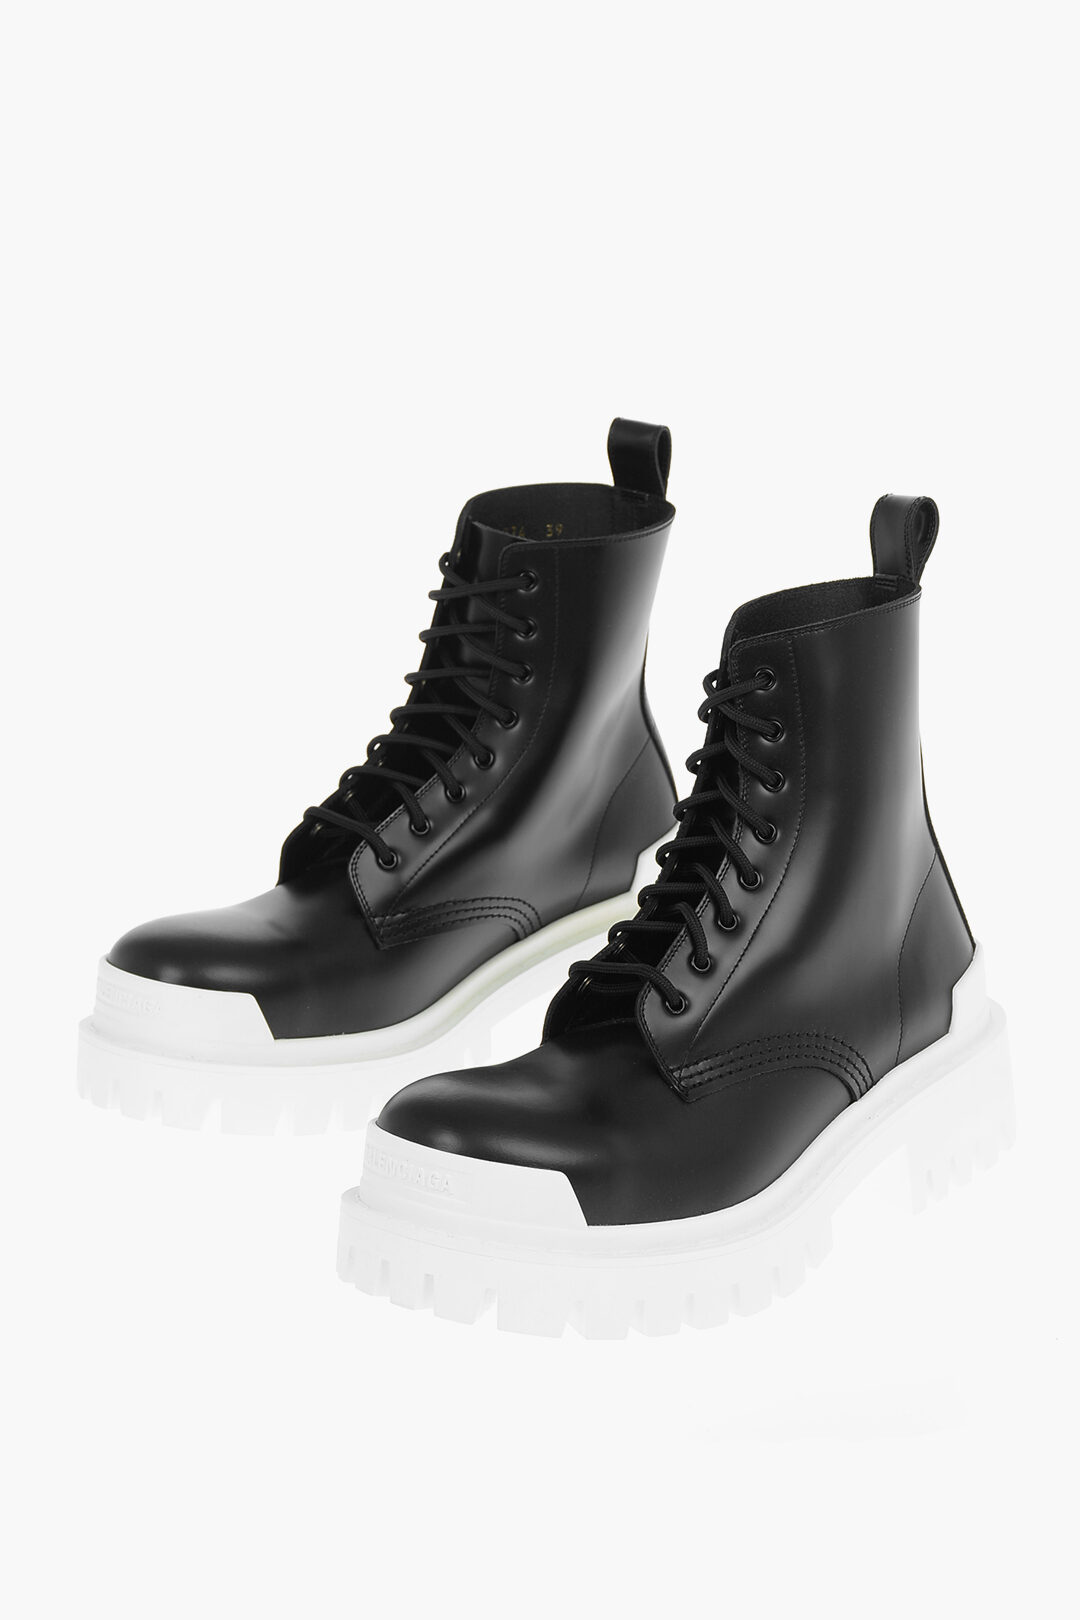 375 balenciaga military combat boots yeezy style suede tan leather  eBay